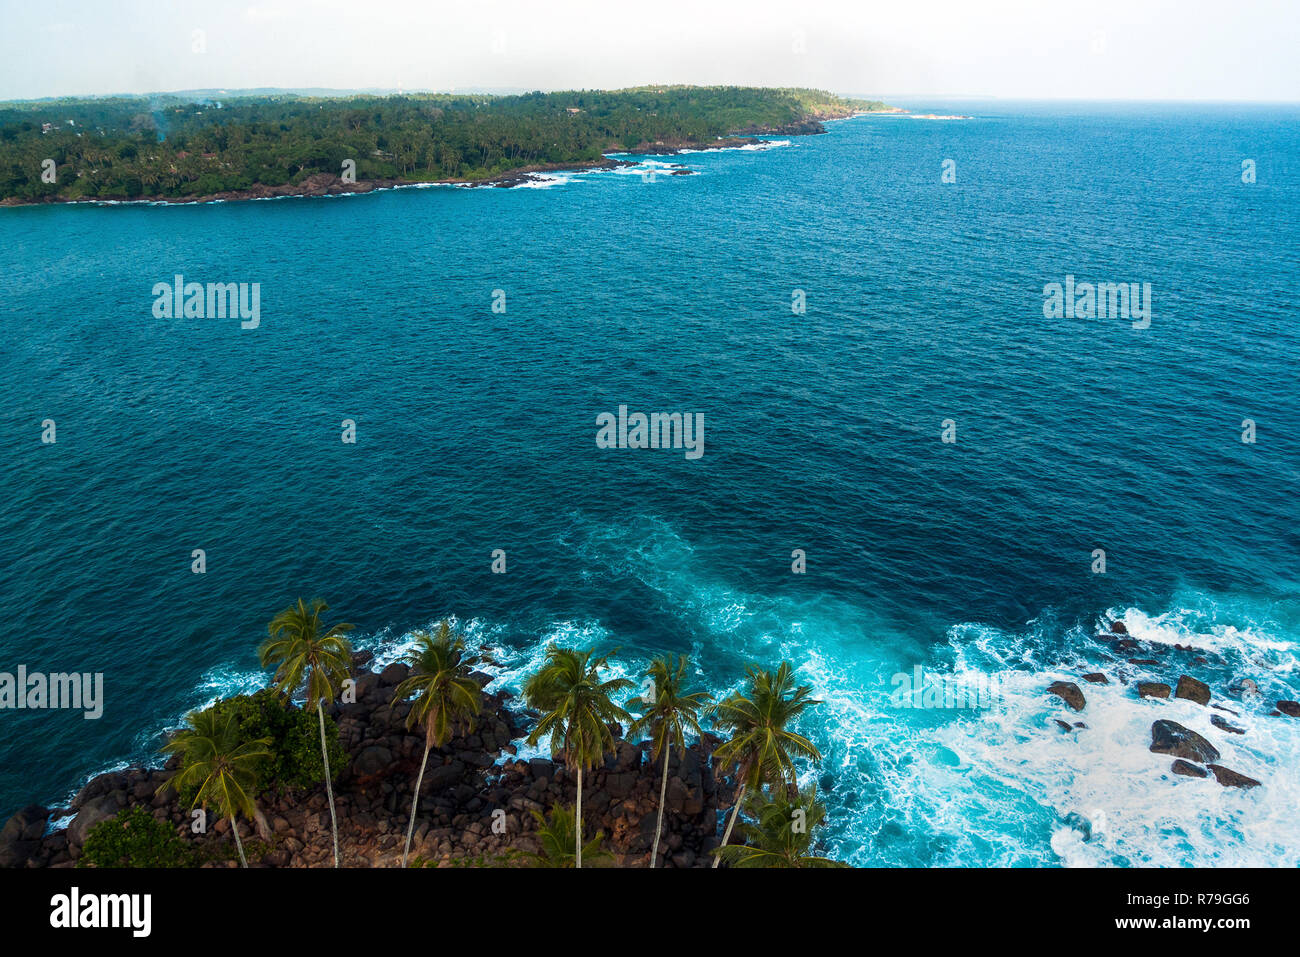 Sri Lanka, Dondra, 02/10/2014: a group of palm trees on the bay of Dondra photographed from the top of lighthouse Stock Photo